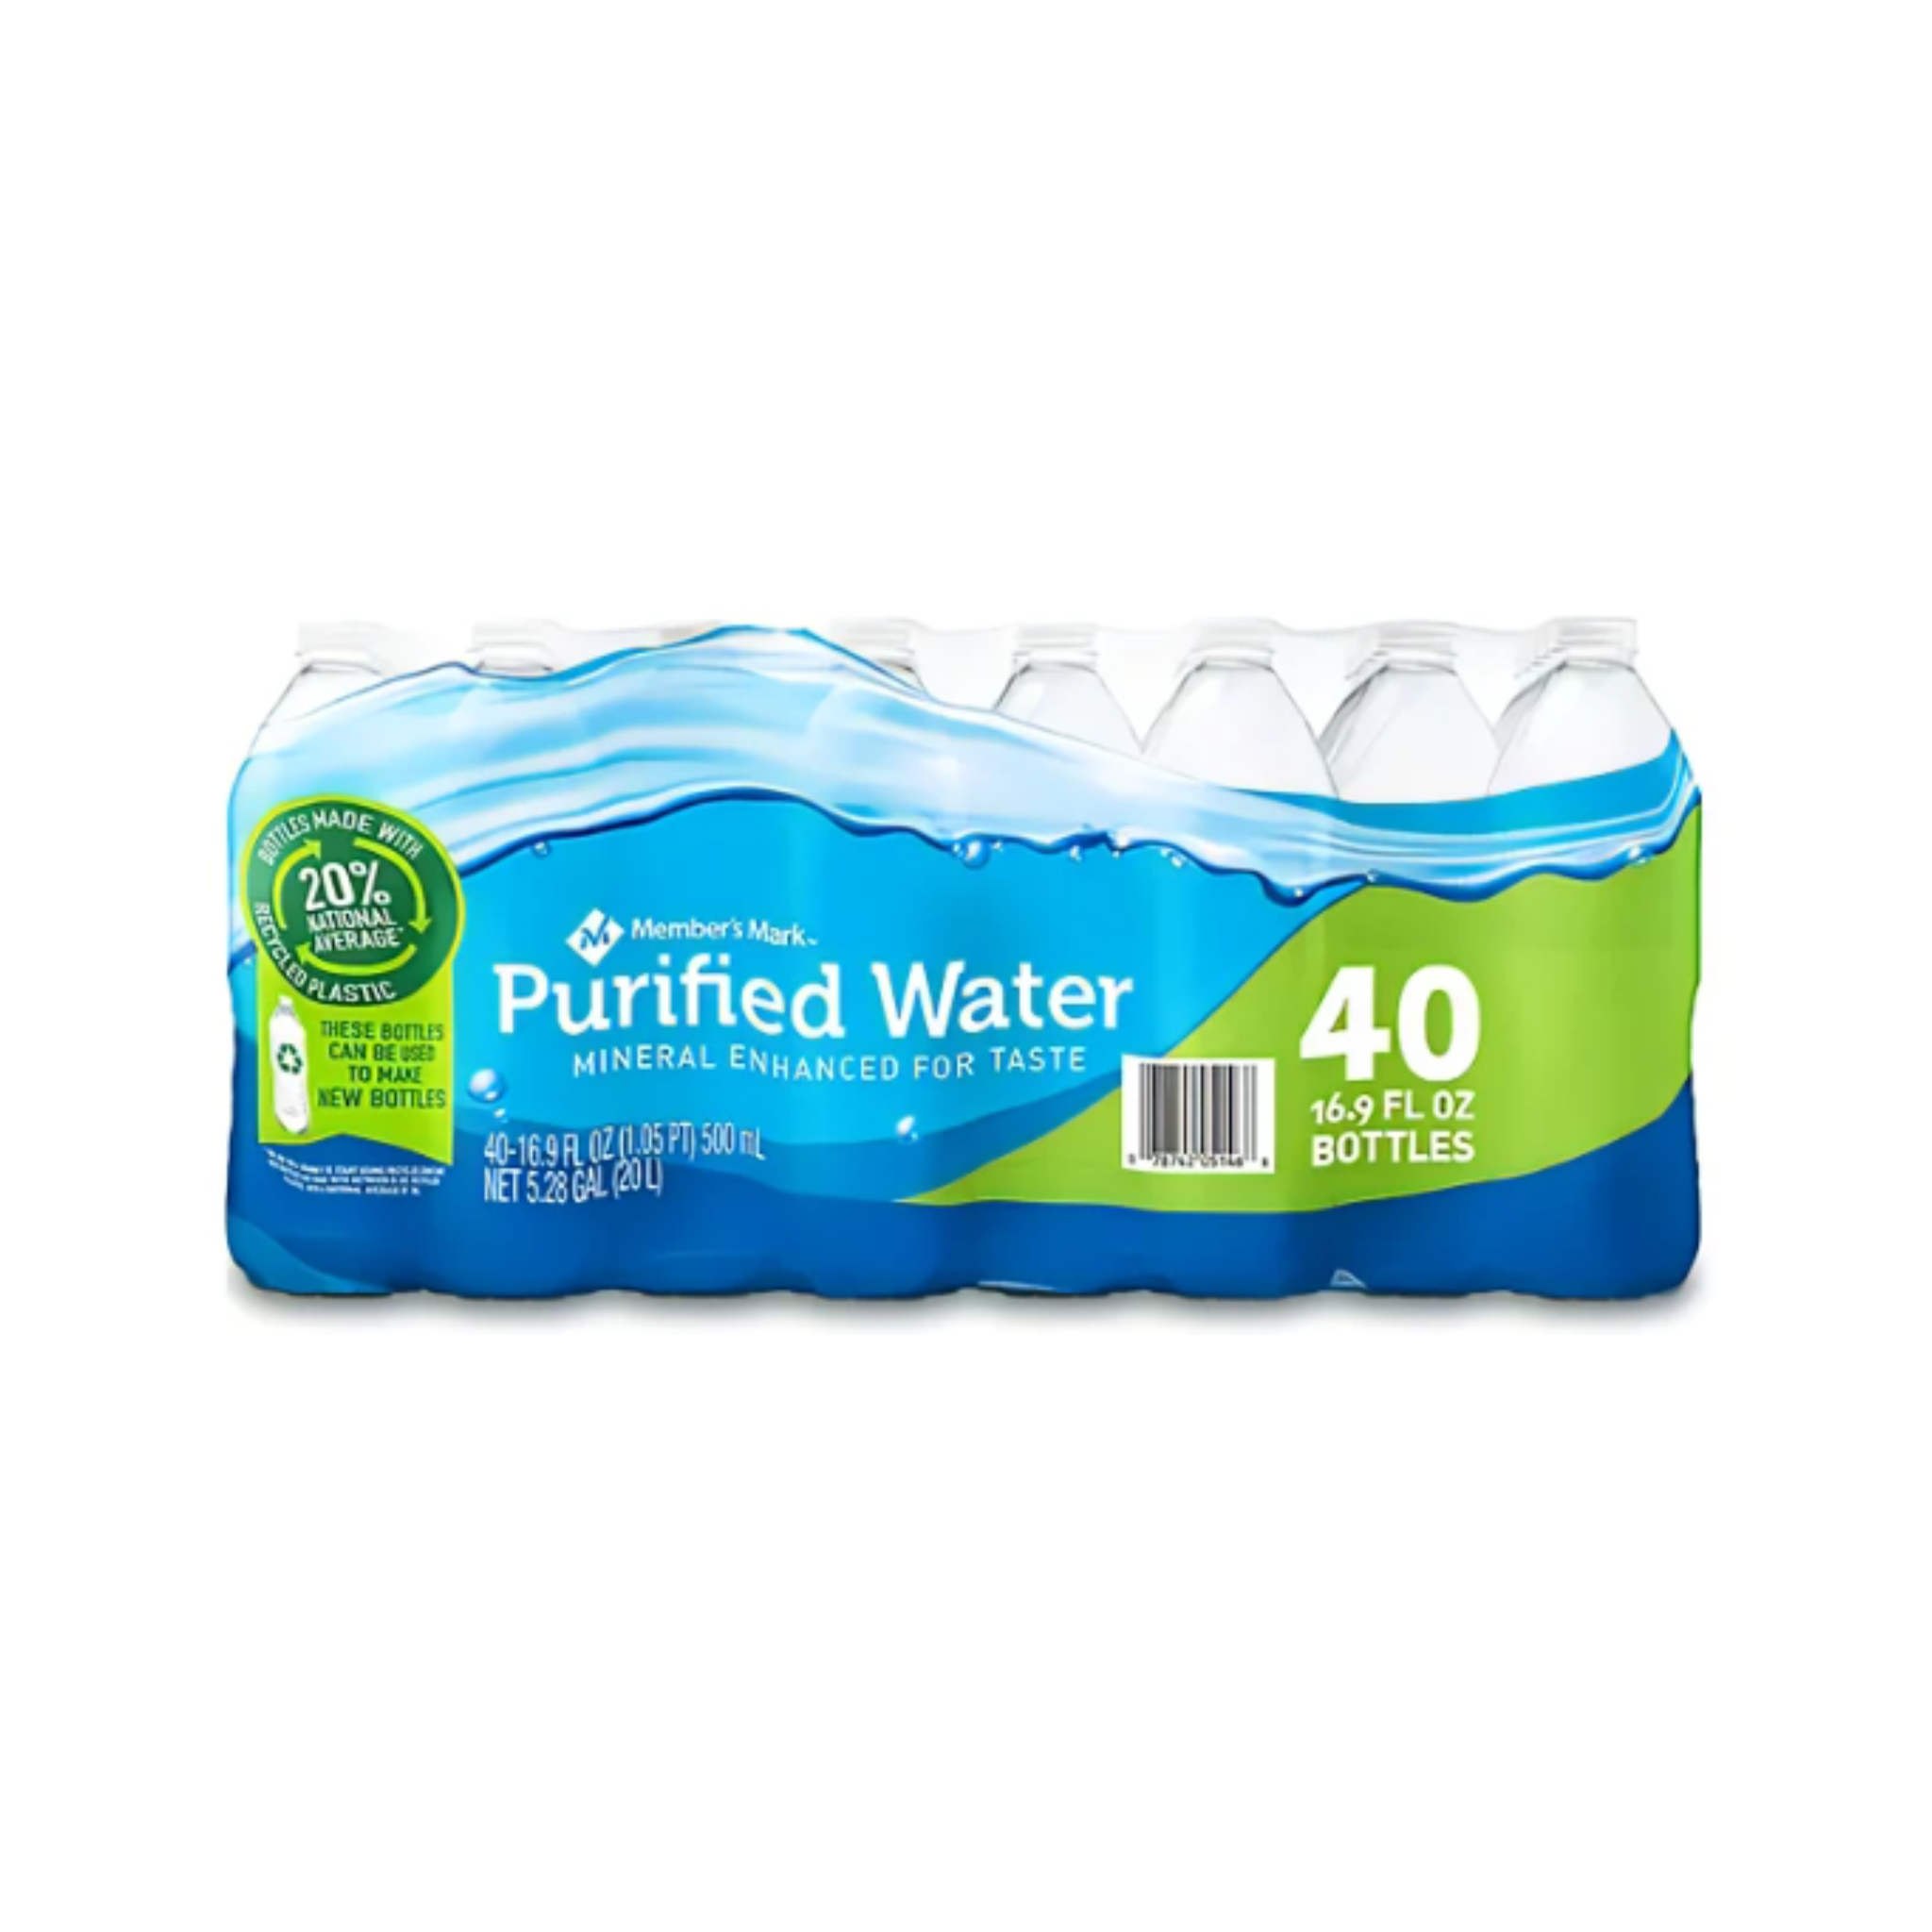 Pure Life Purified Water, 40 Pack - 40 pack, 16.9 fl oz bottles